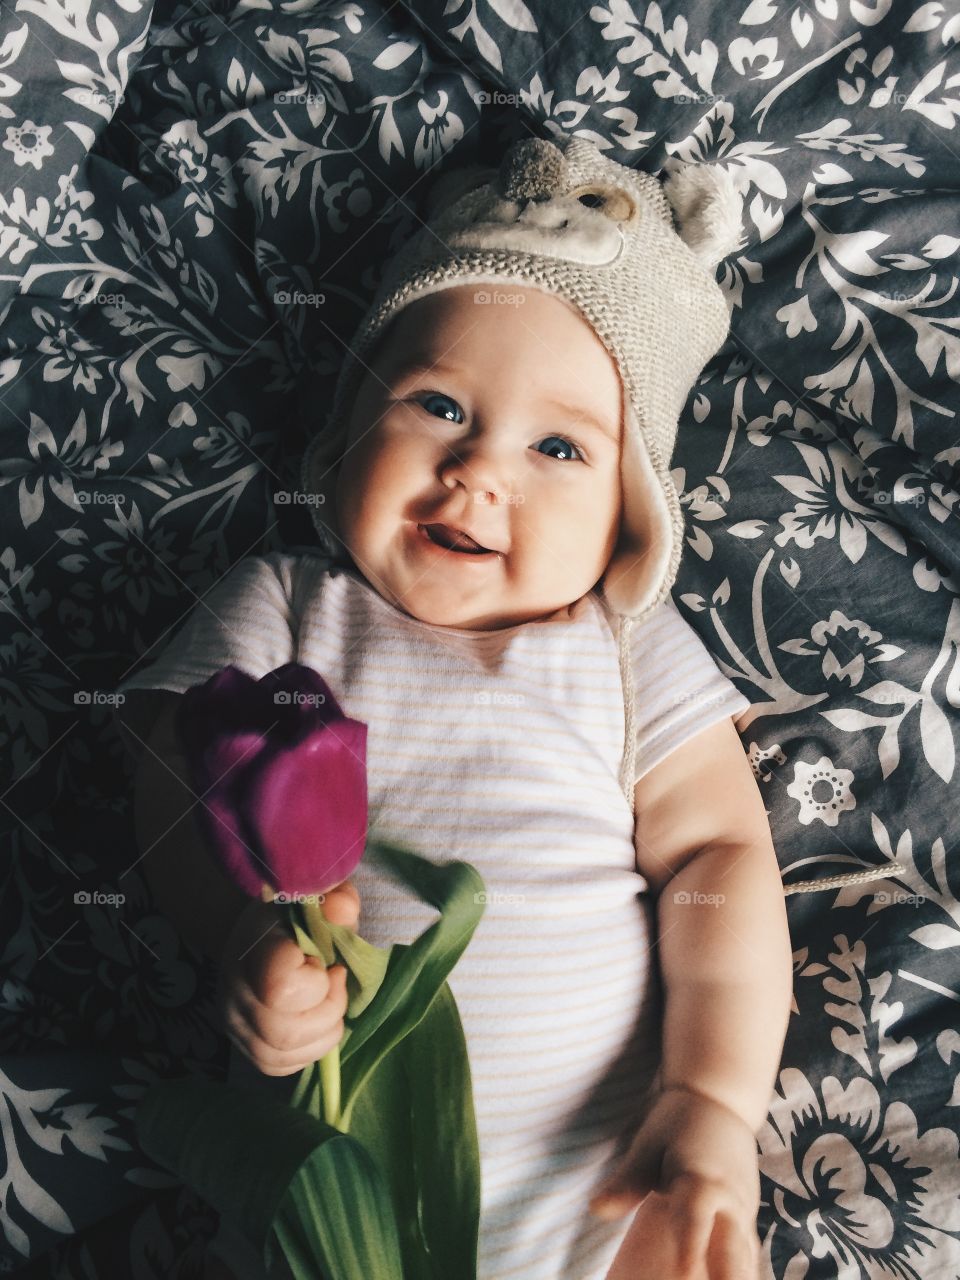 Cute smiling baby-girl with a flower